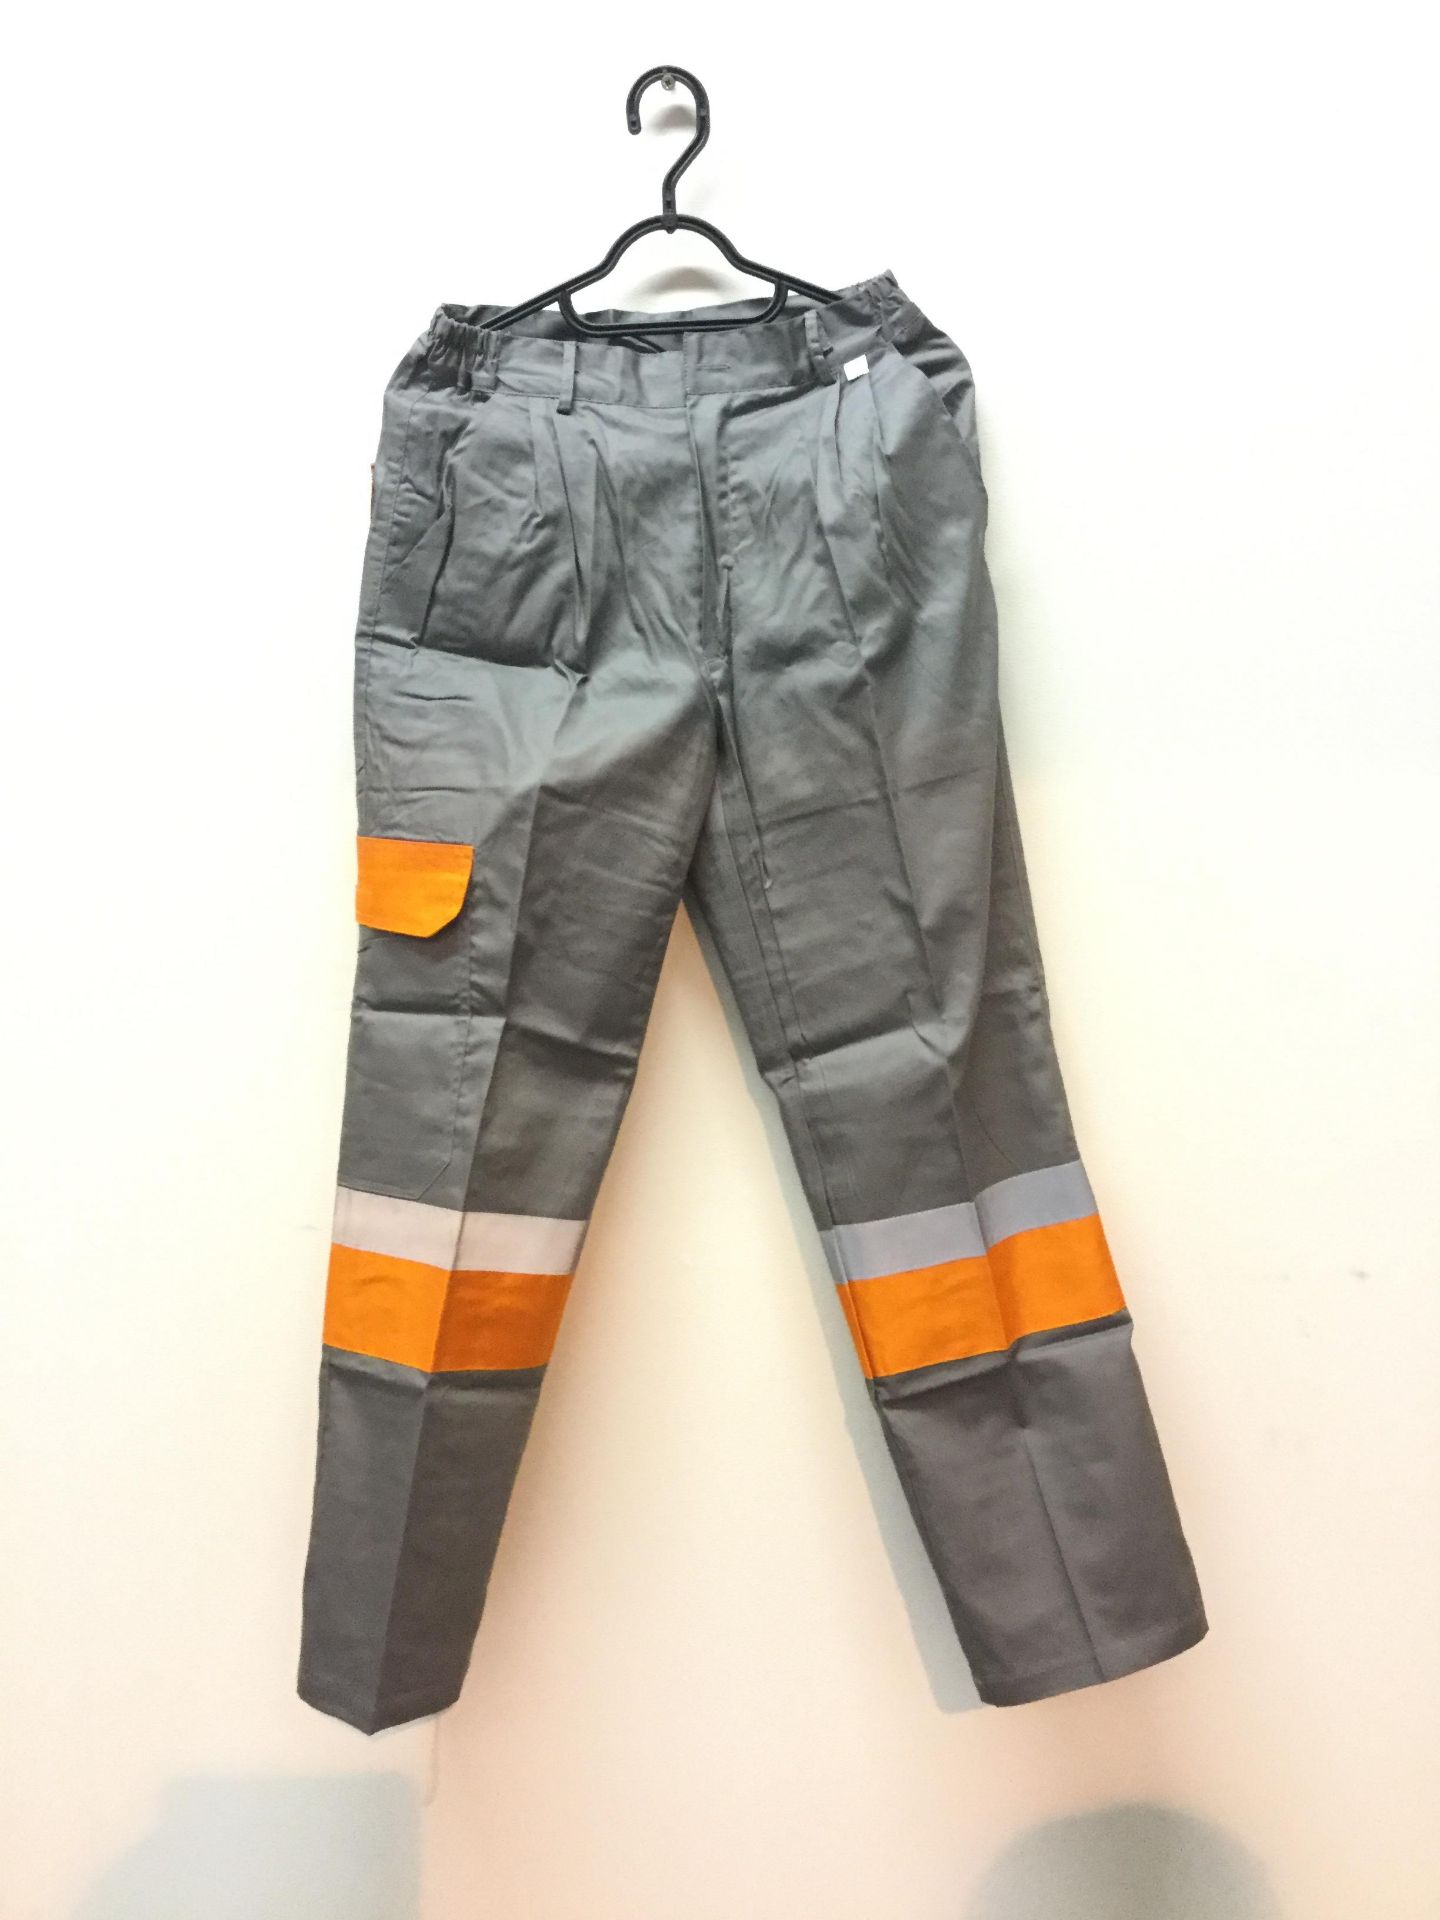 Flame Retardant Summer Trousers - Size 46